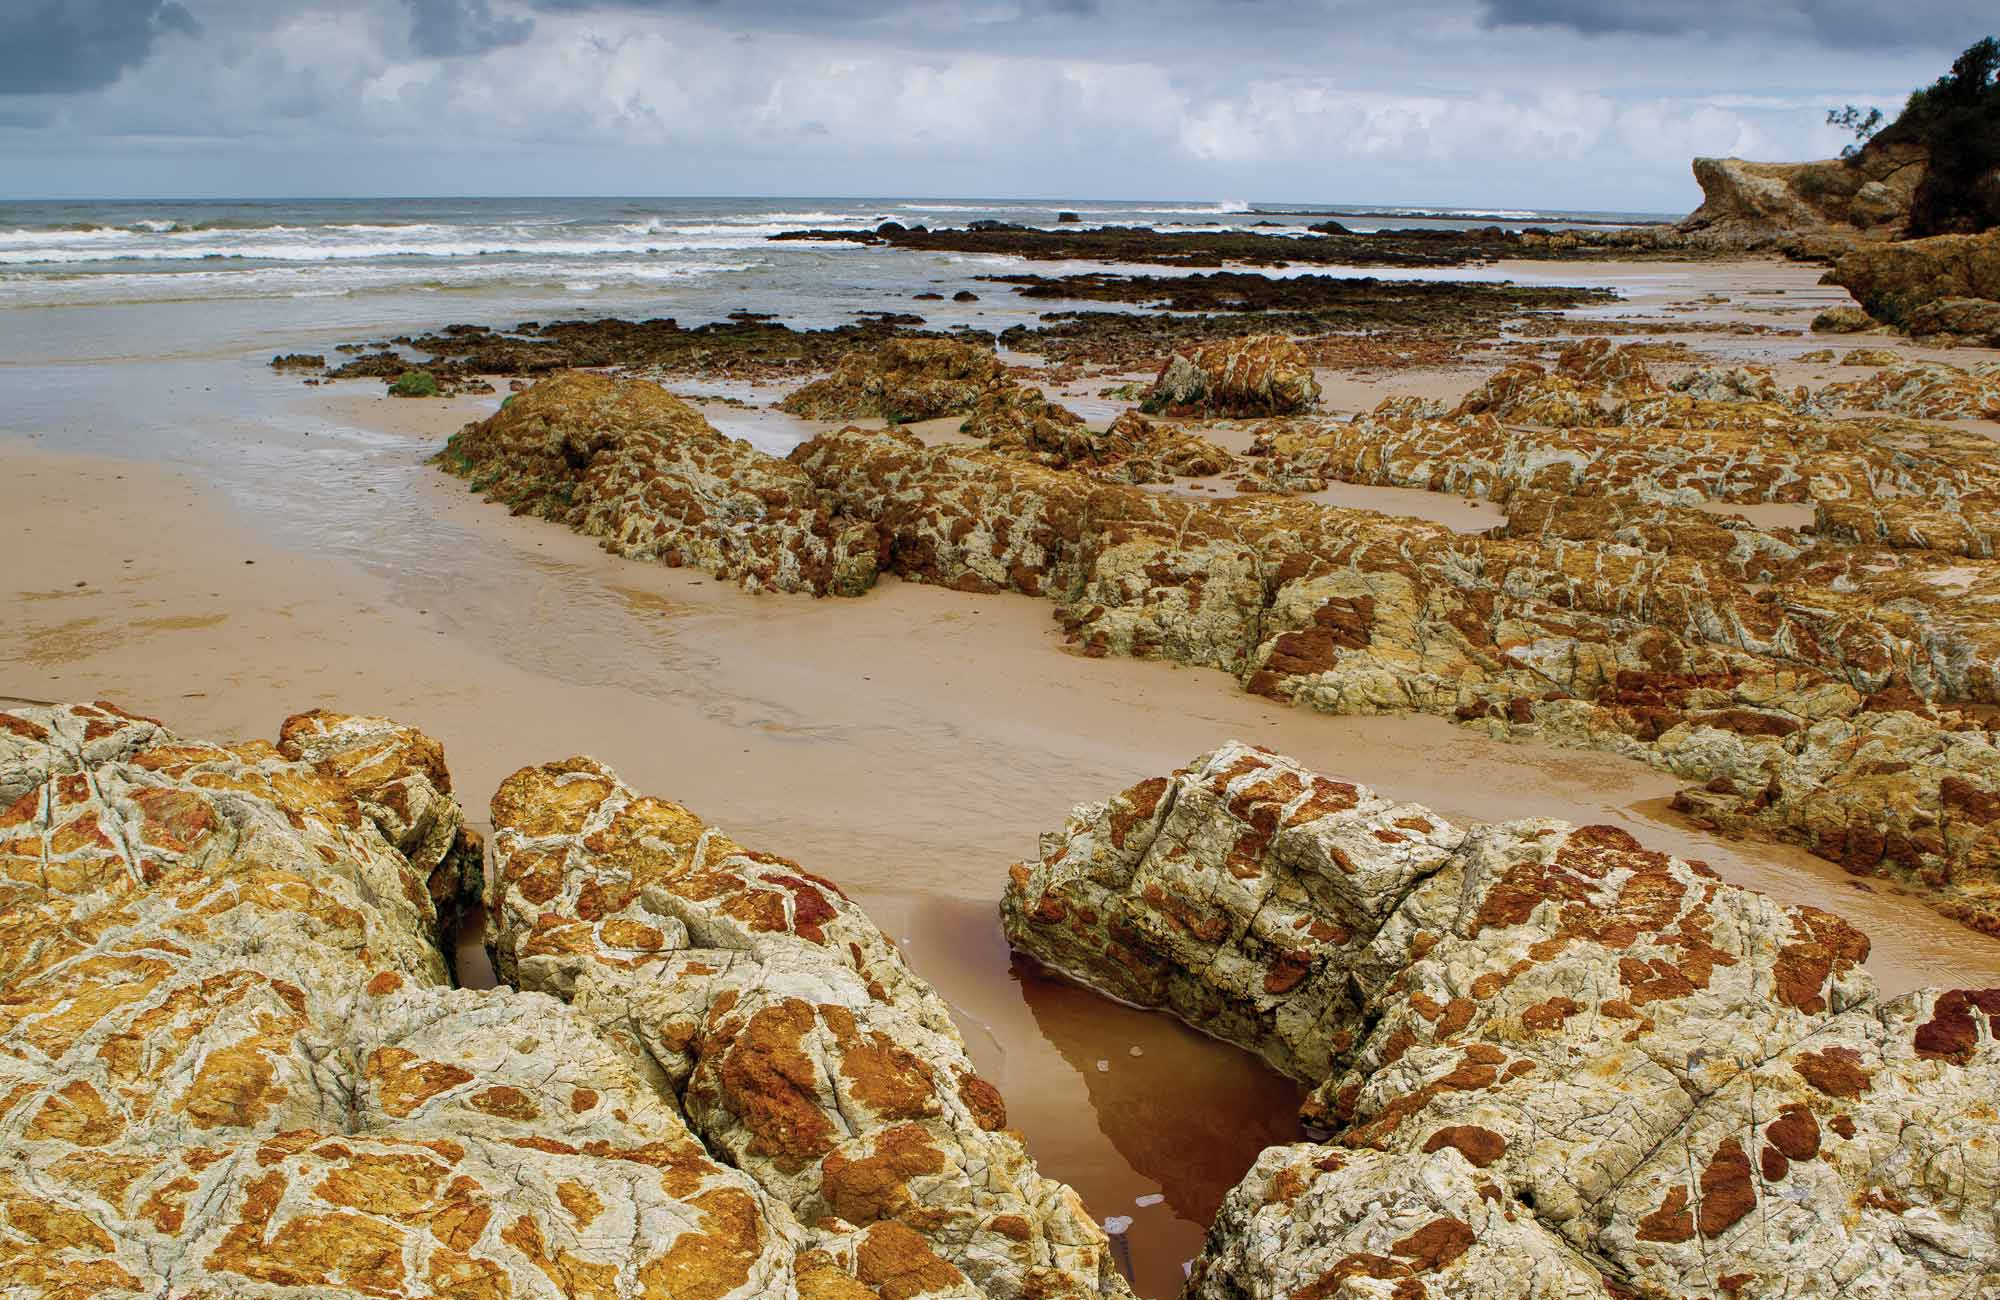 Golden sand and rocks in Yuraygir National Park. Photo: Rob Cleary